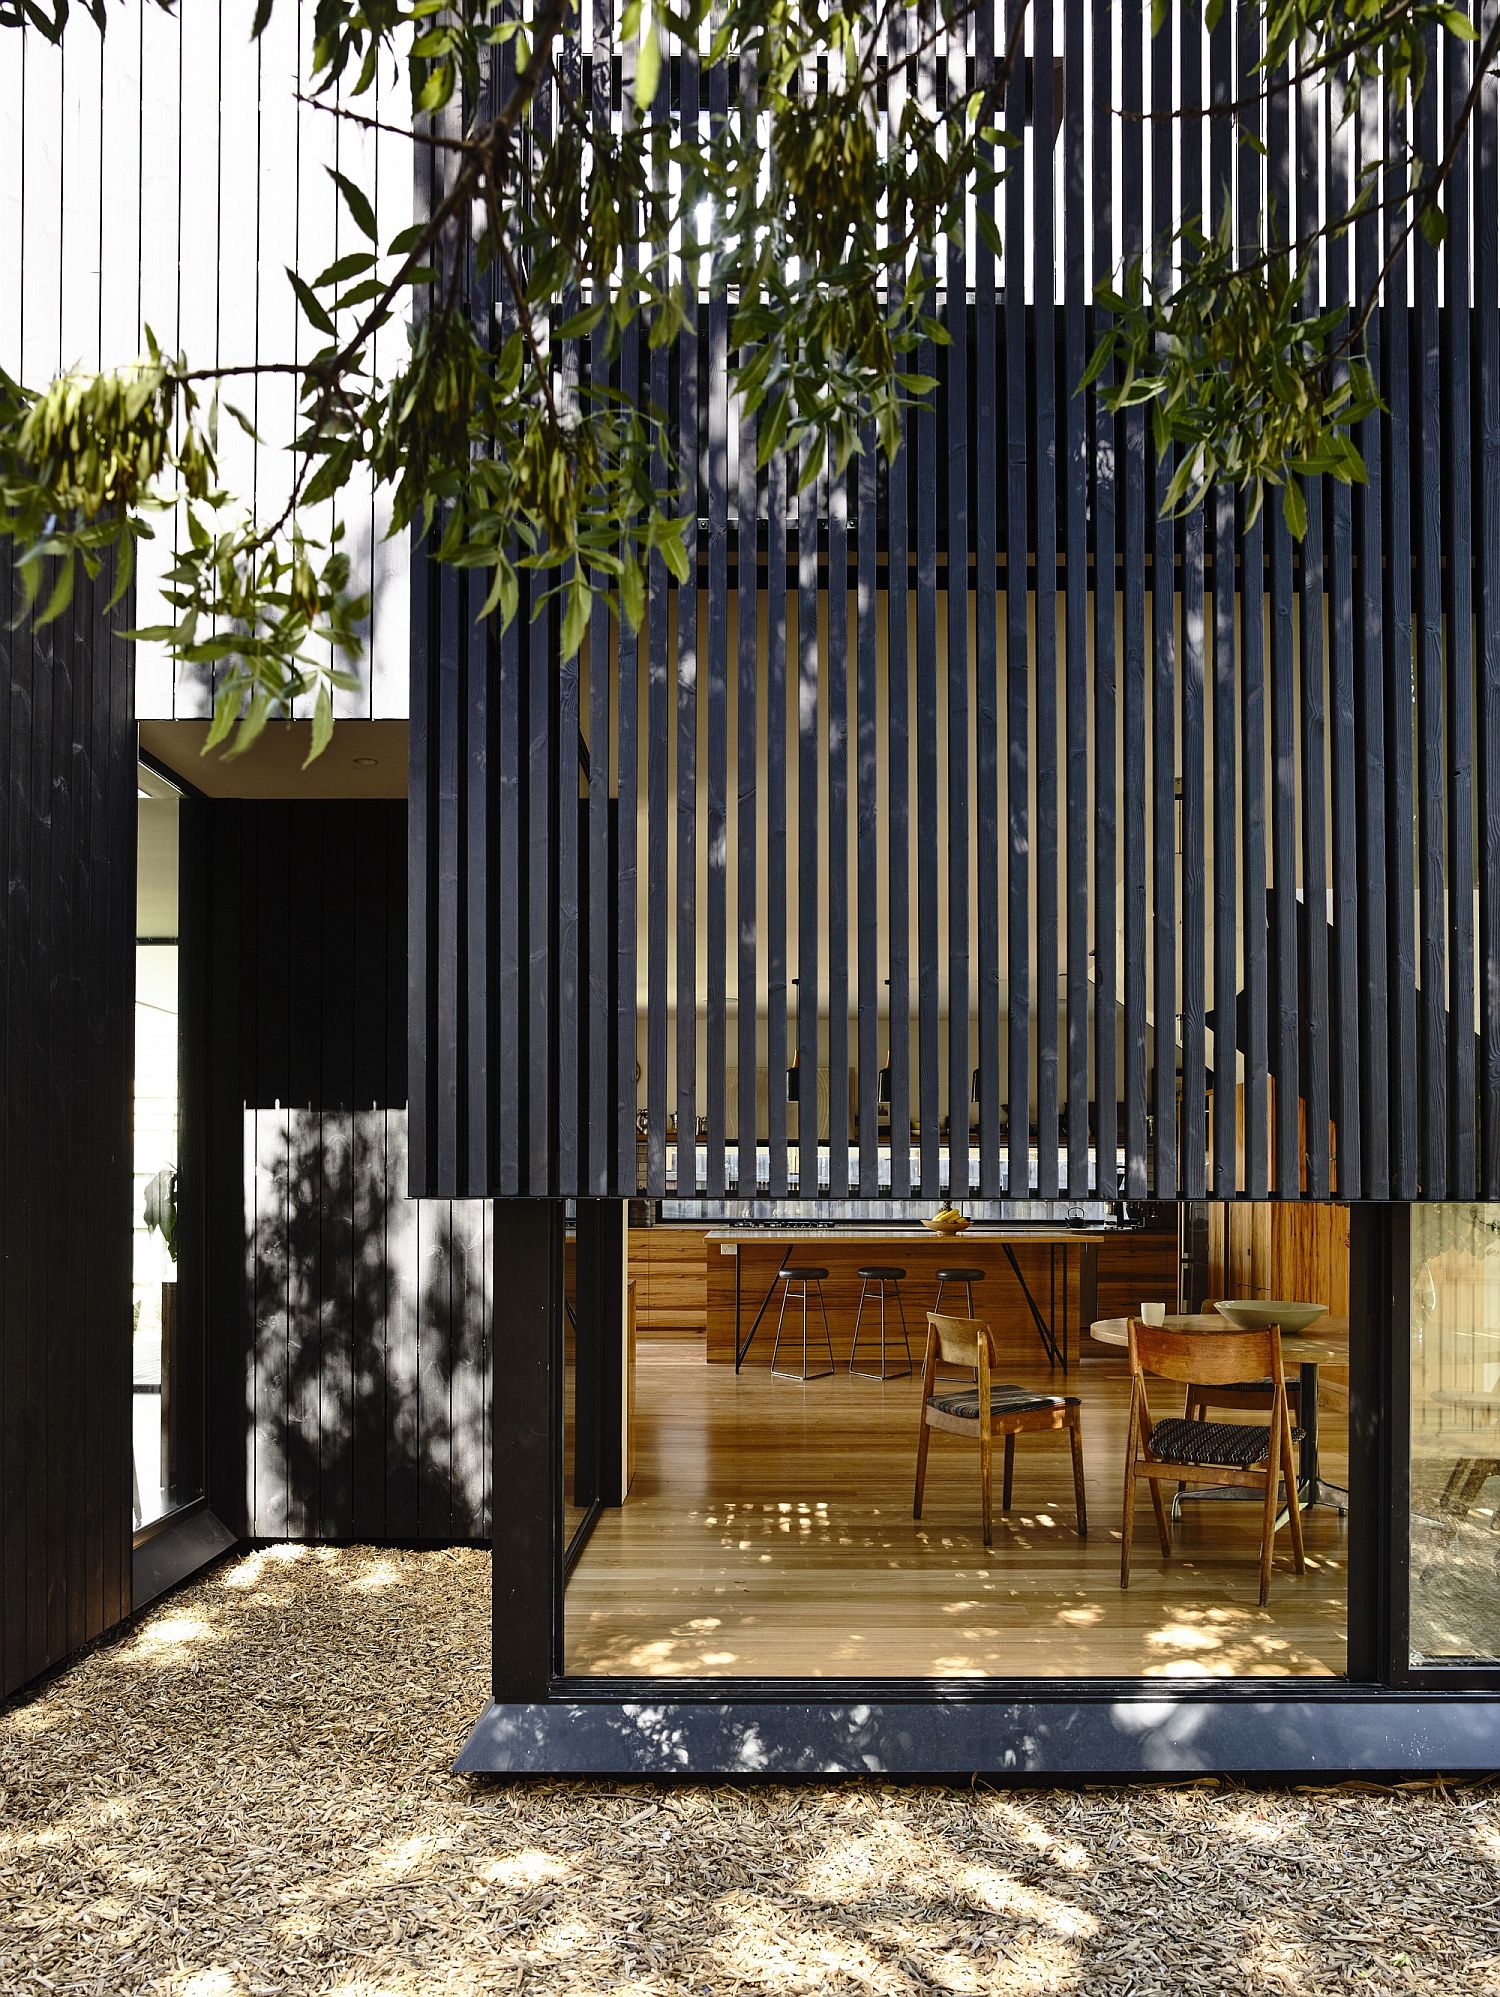 Wooden slats filter in sunlight and give the homeonwers adequate privacy